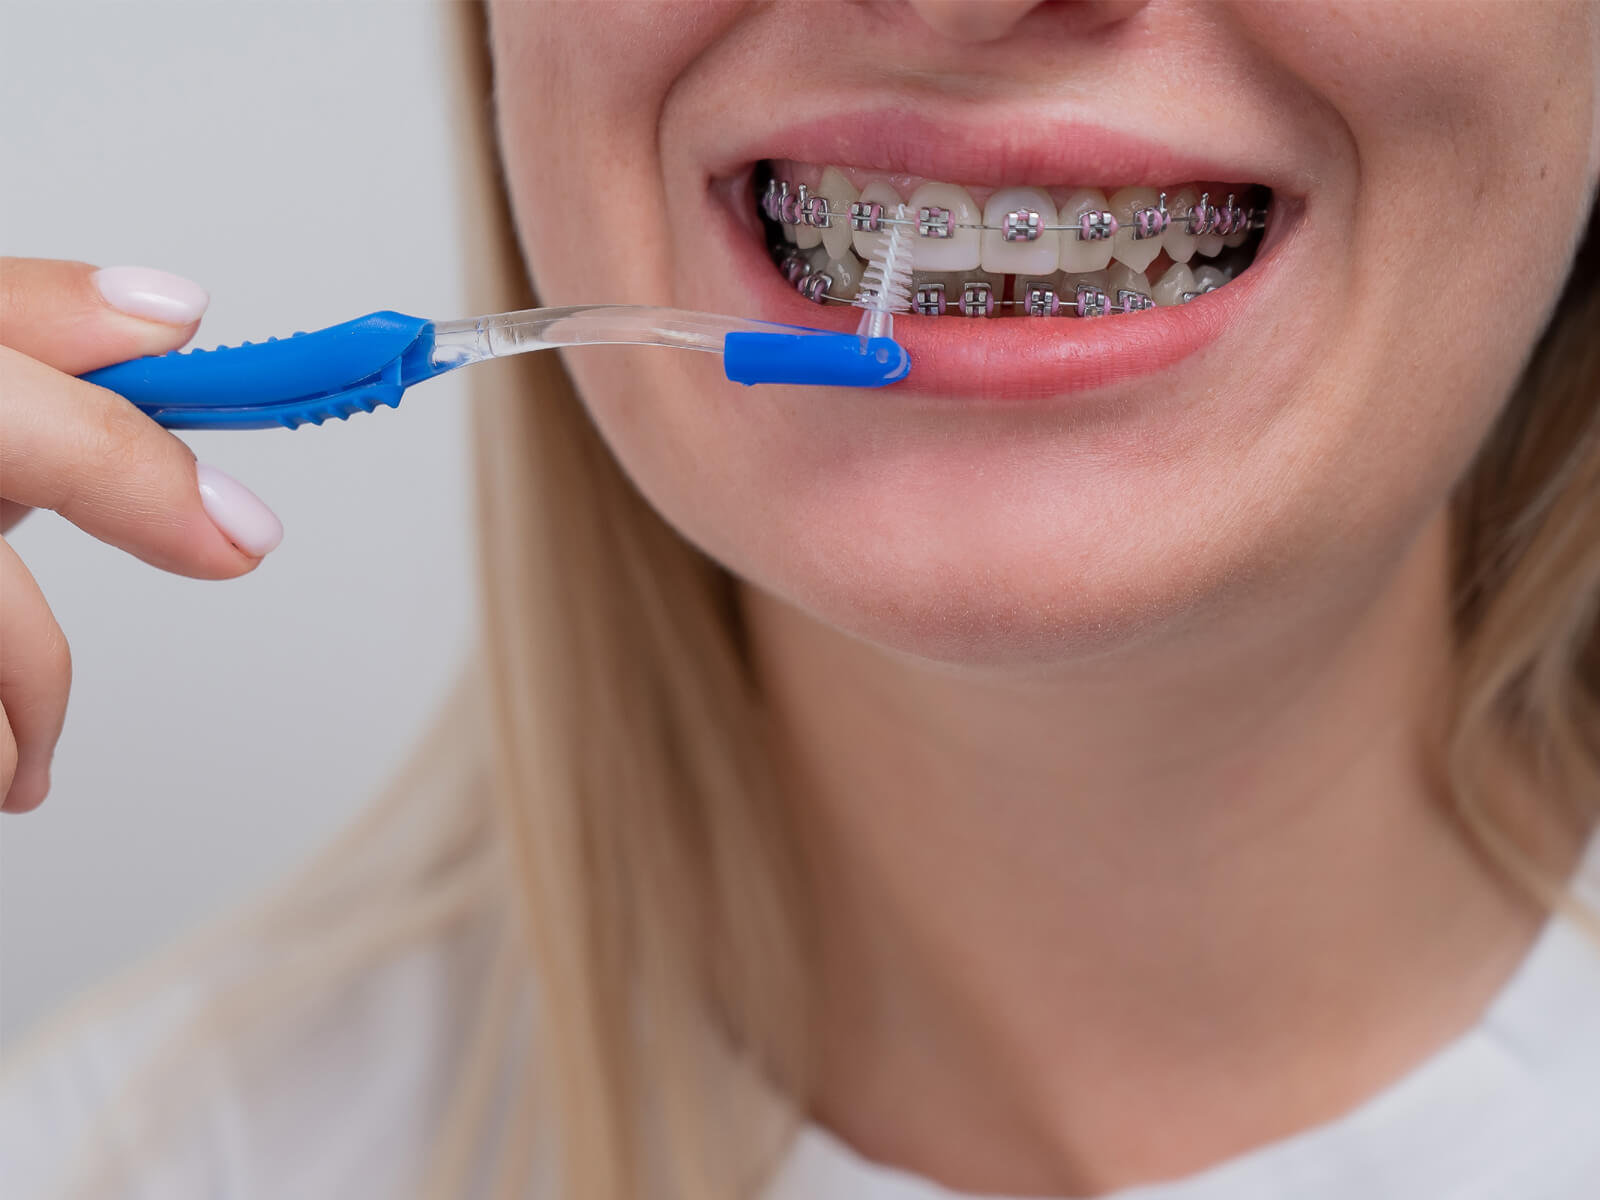 Common Flossing Mistakes To Avoid With Braces